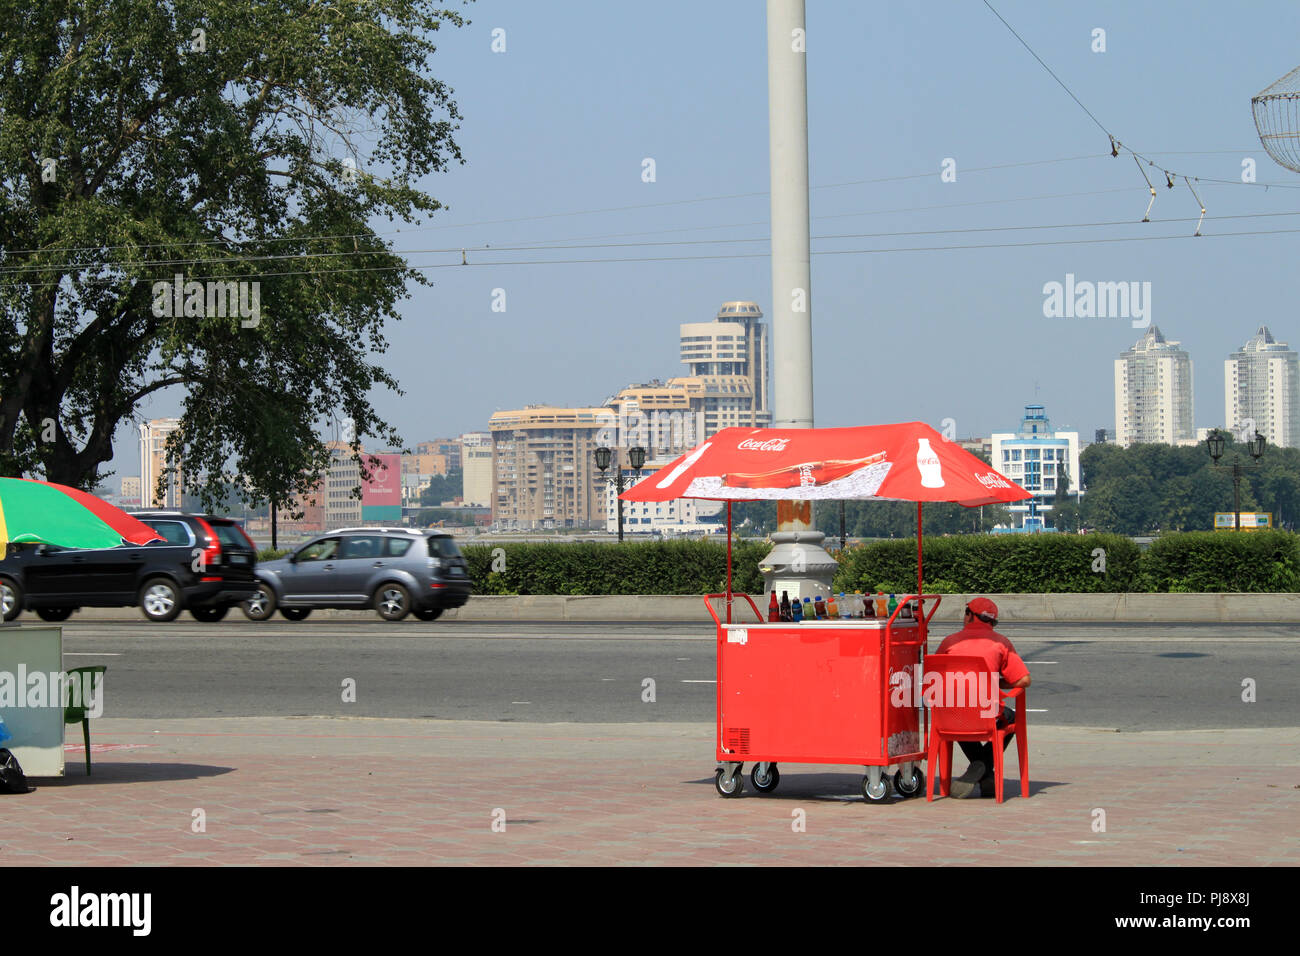 Sausage booth, City of Yekaterinburg, Russia Stock Photo